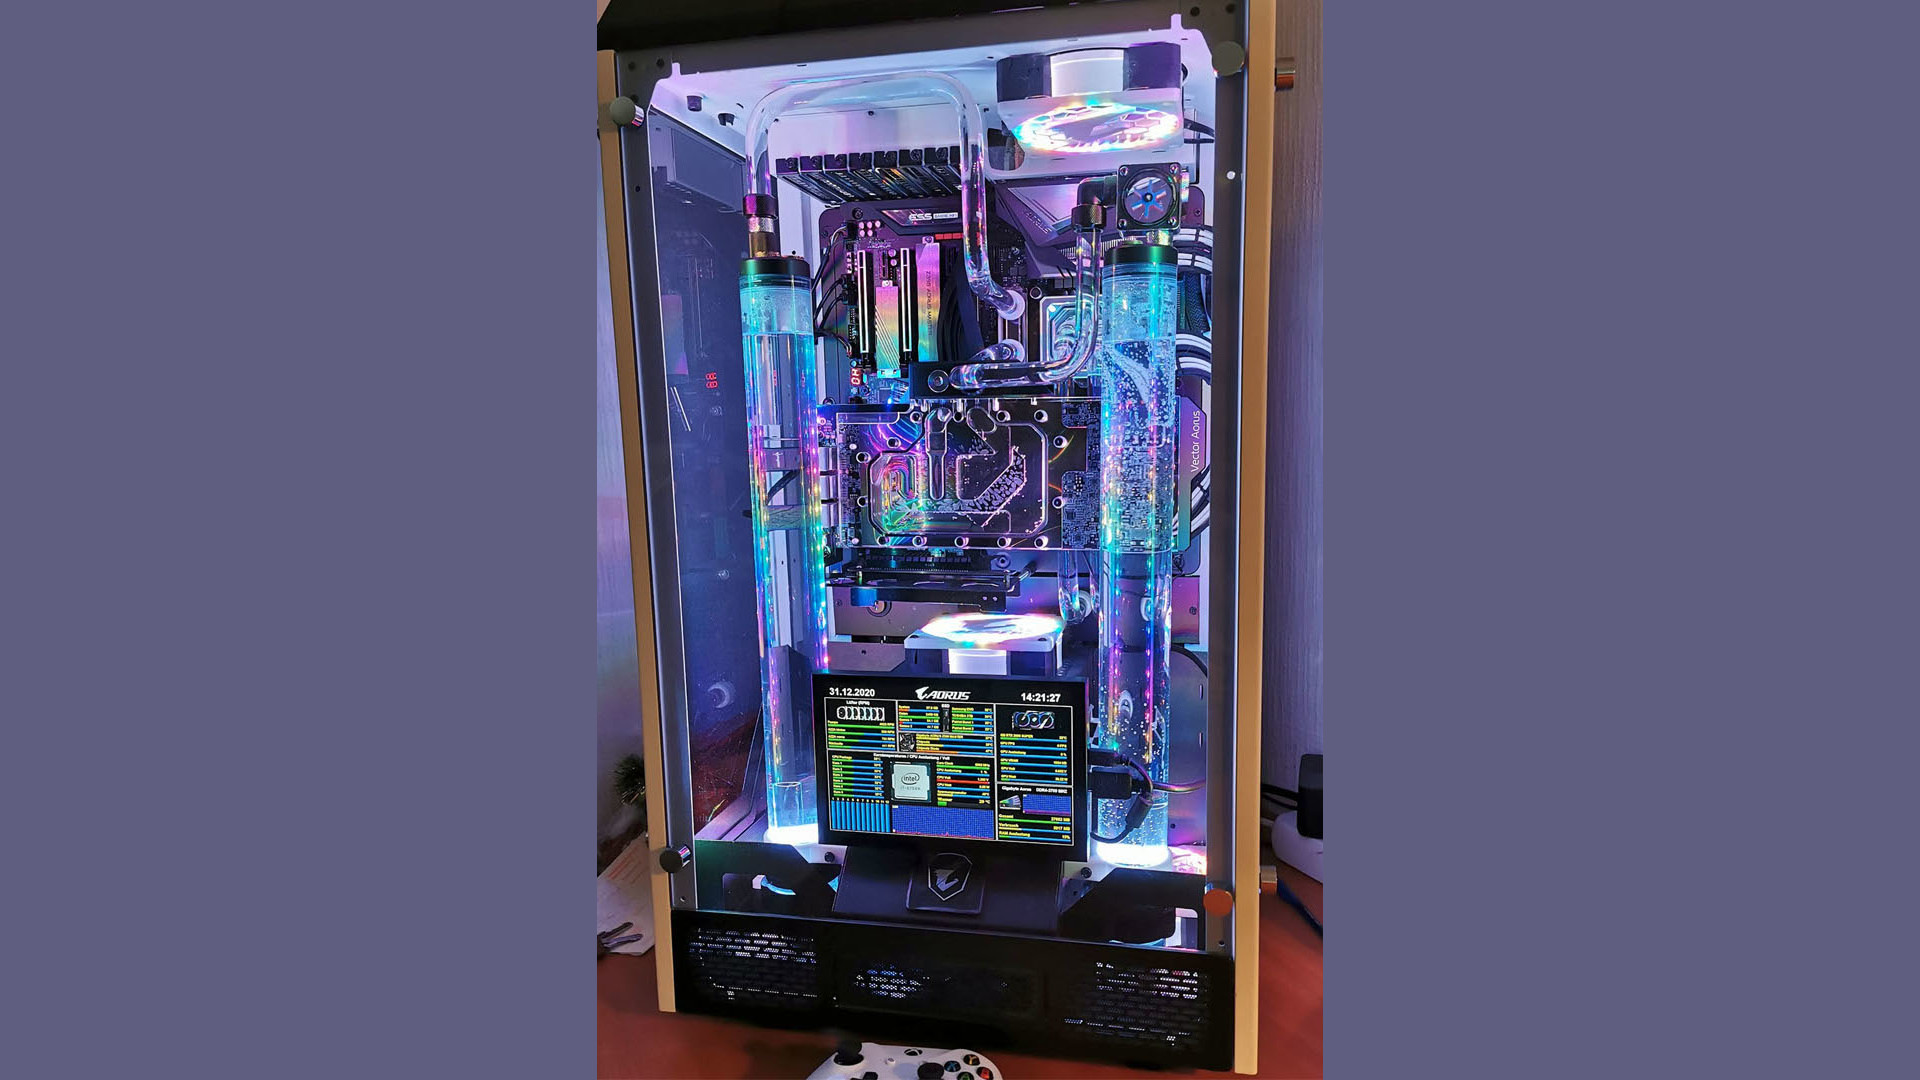 This symmetrical dual-reservoir water-cooled gaming PC is amazing